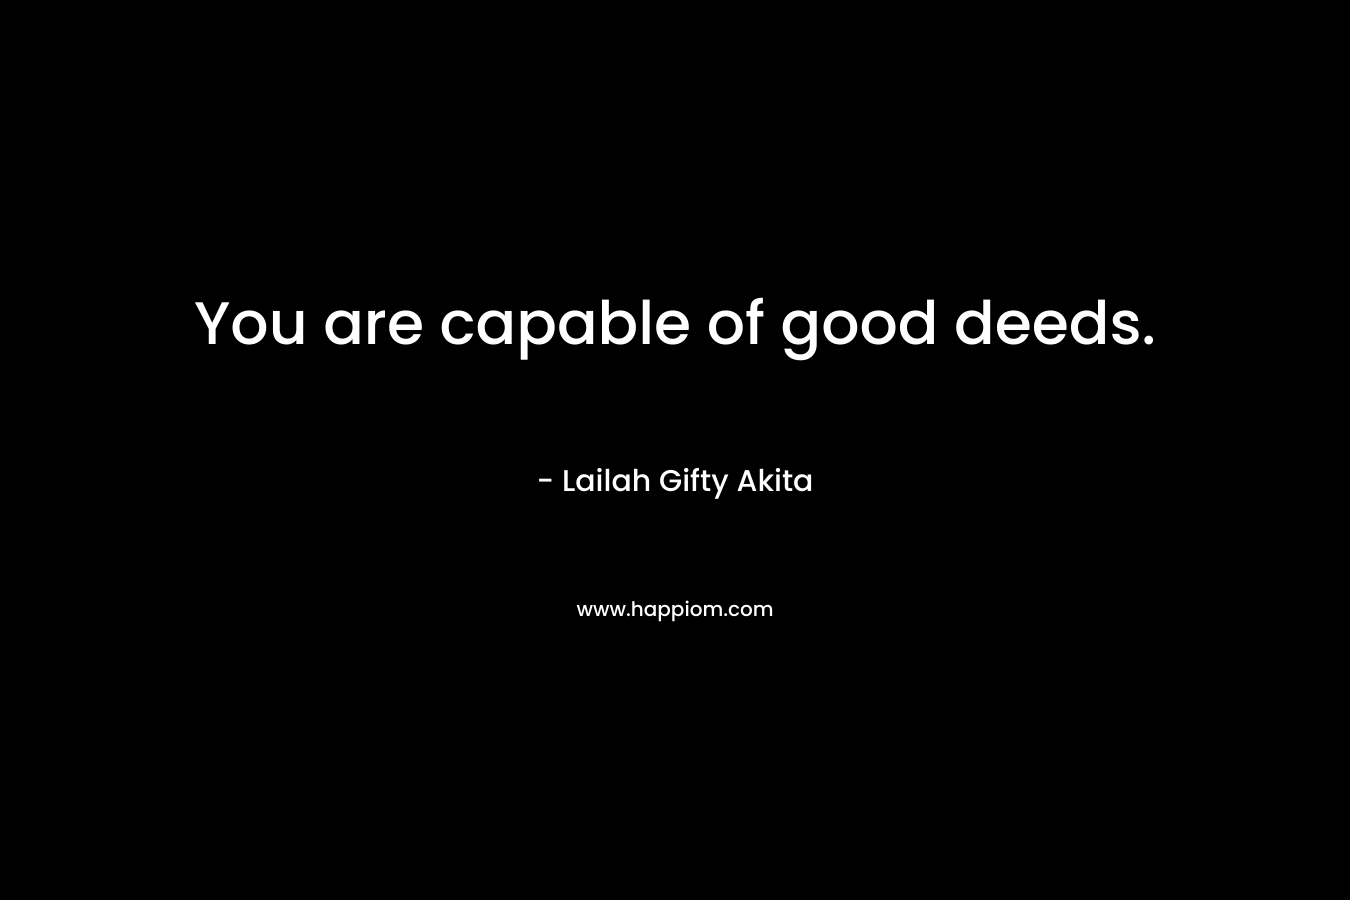 You are capable of good deeds.